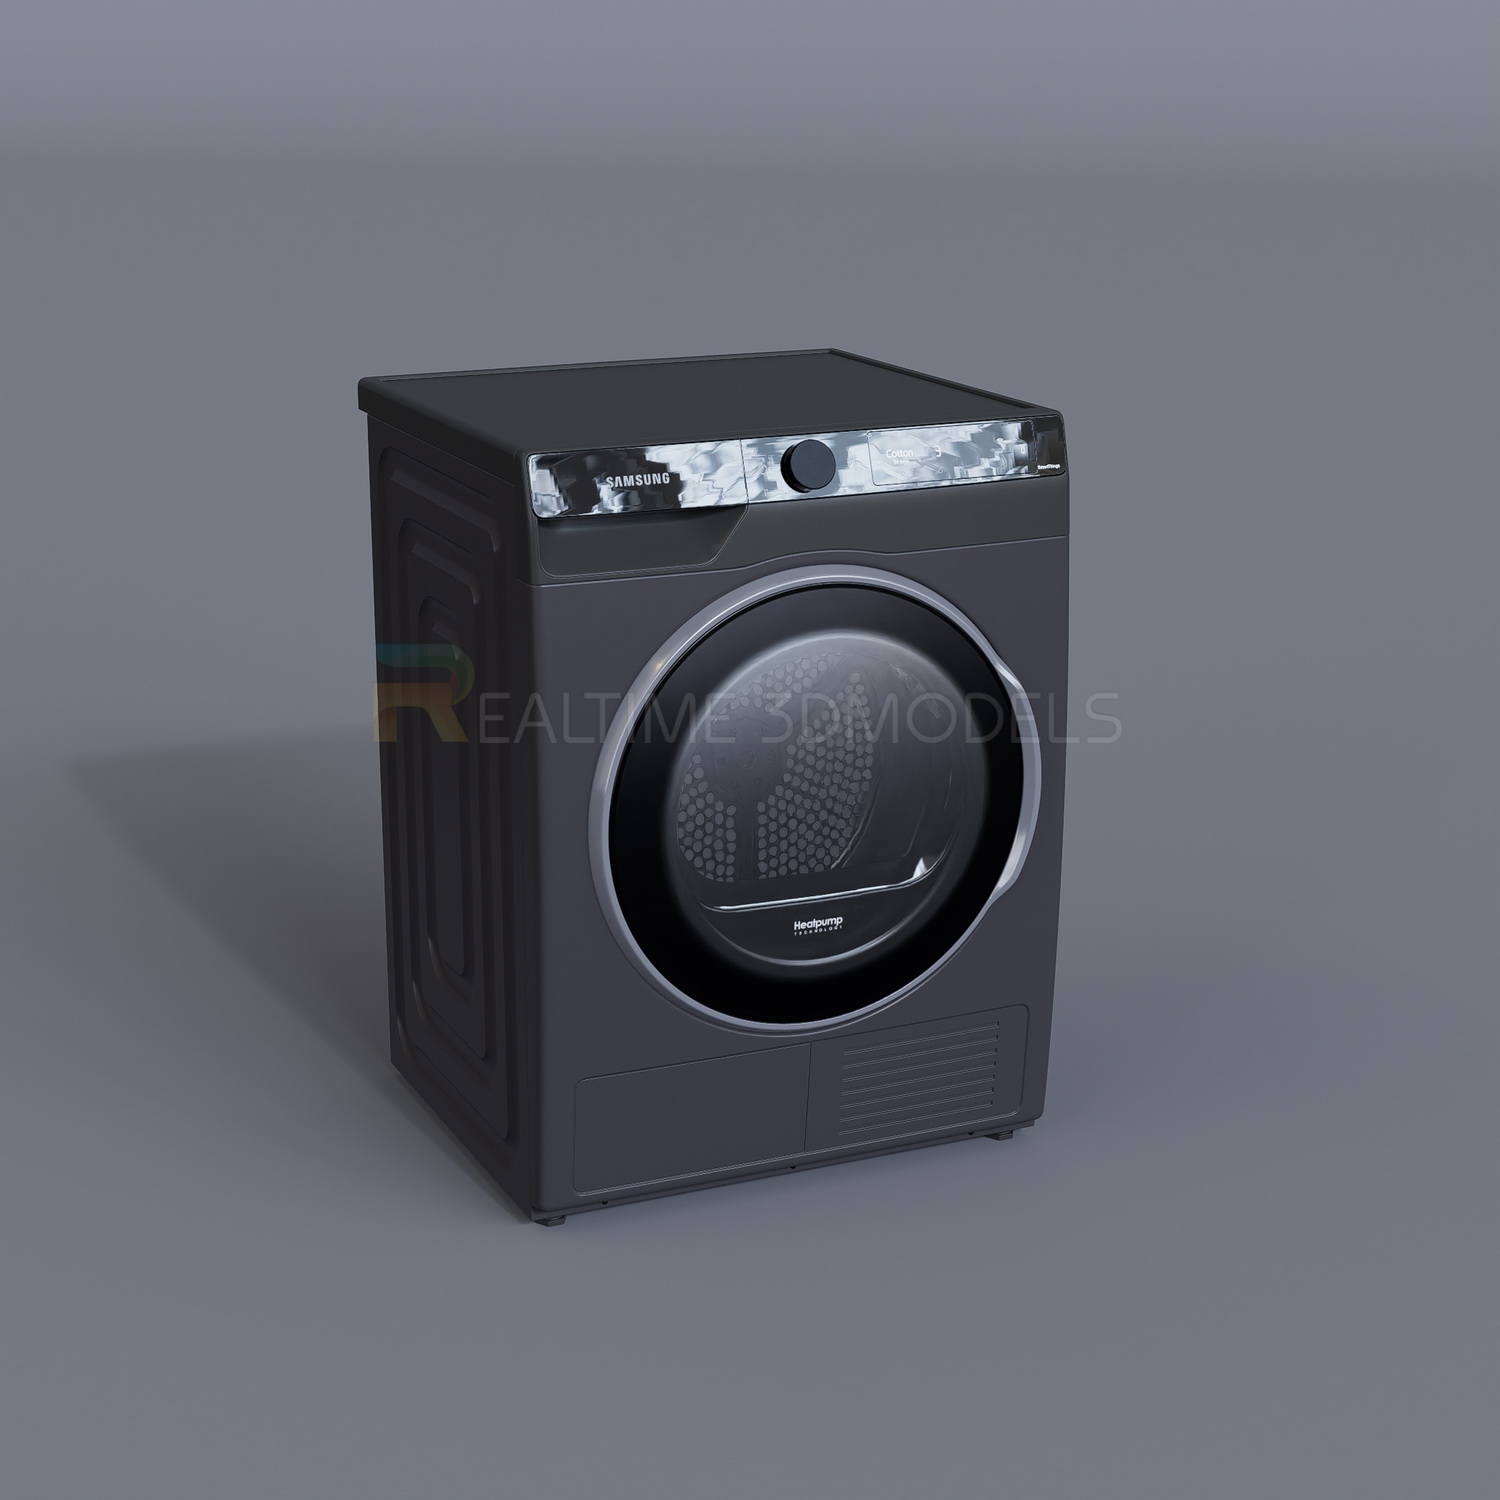 Realtime3d-00965